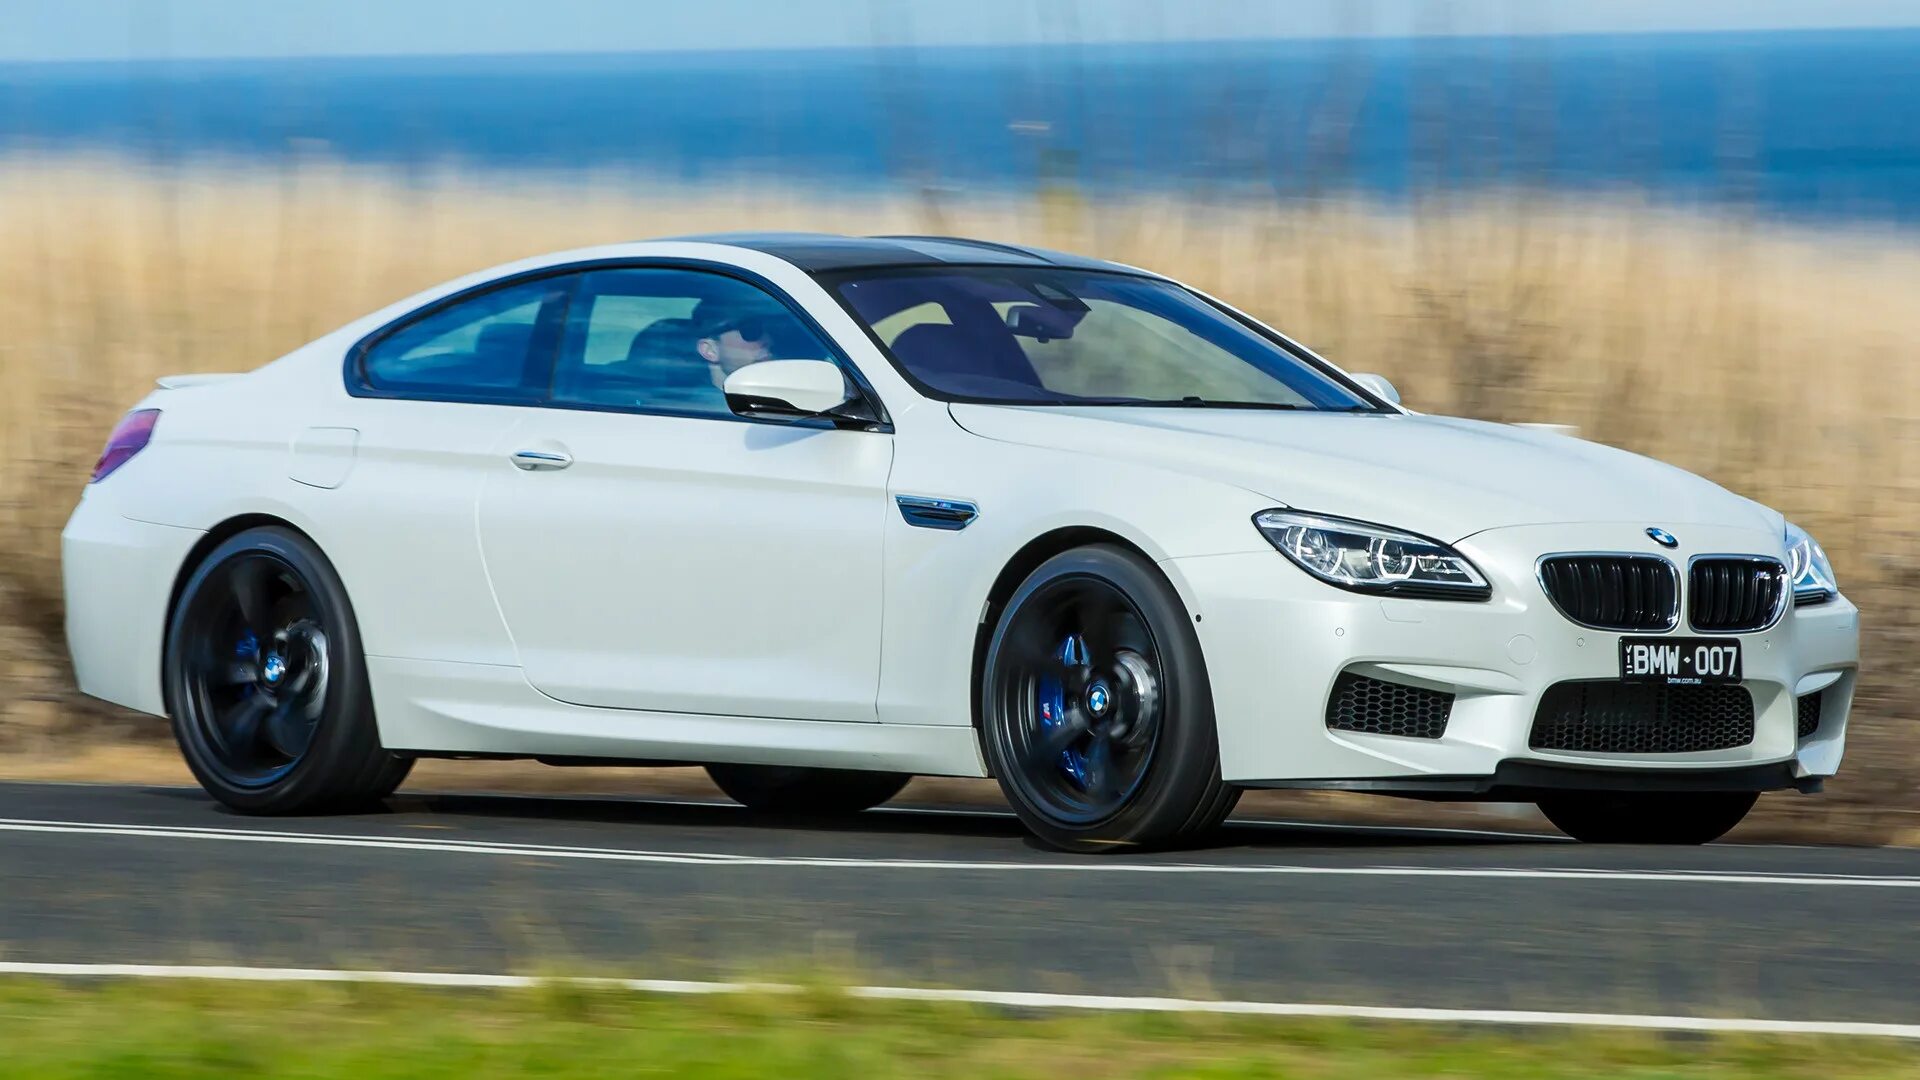 Bmw 6 m. BMW m6 2018. БМВ м6 купе. BMW m6 Coupe Competition. BMW m6 2018 Coupe.